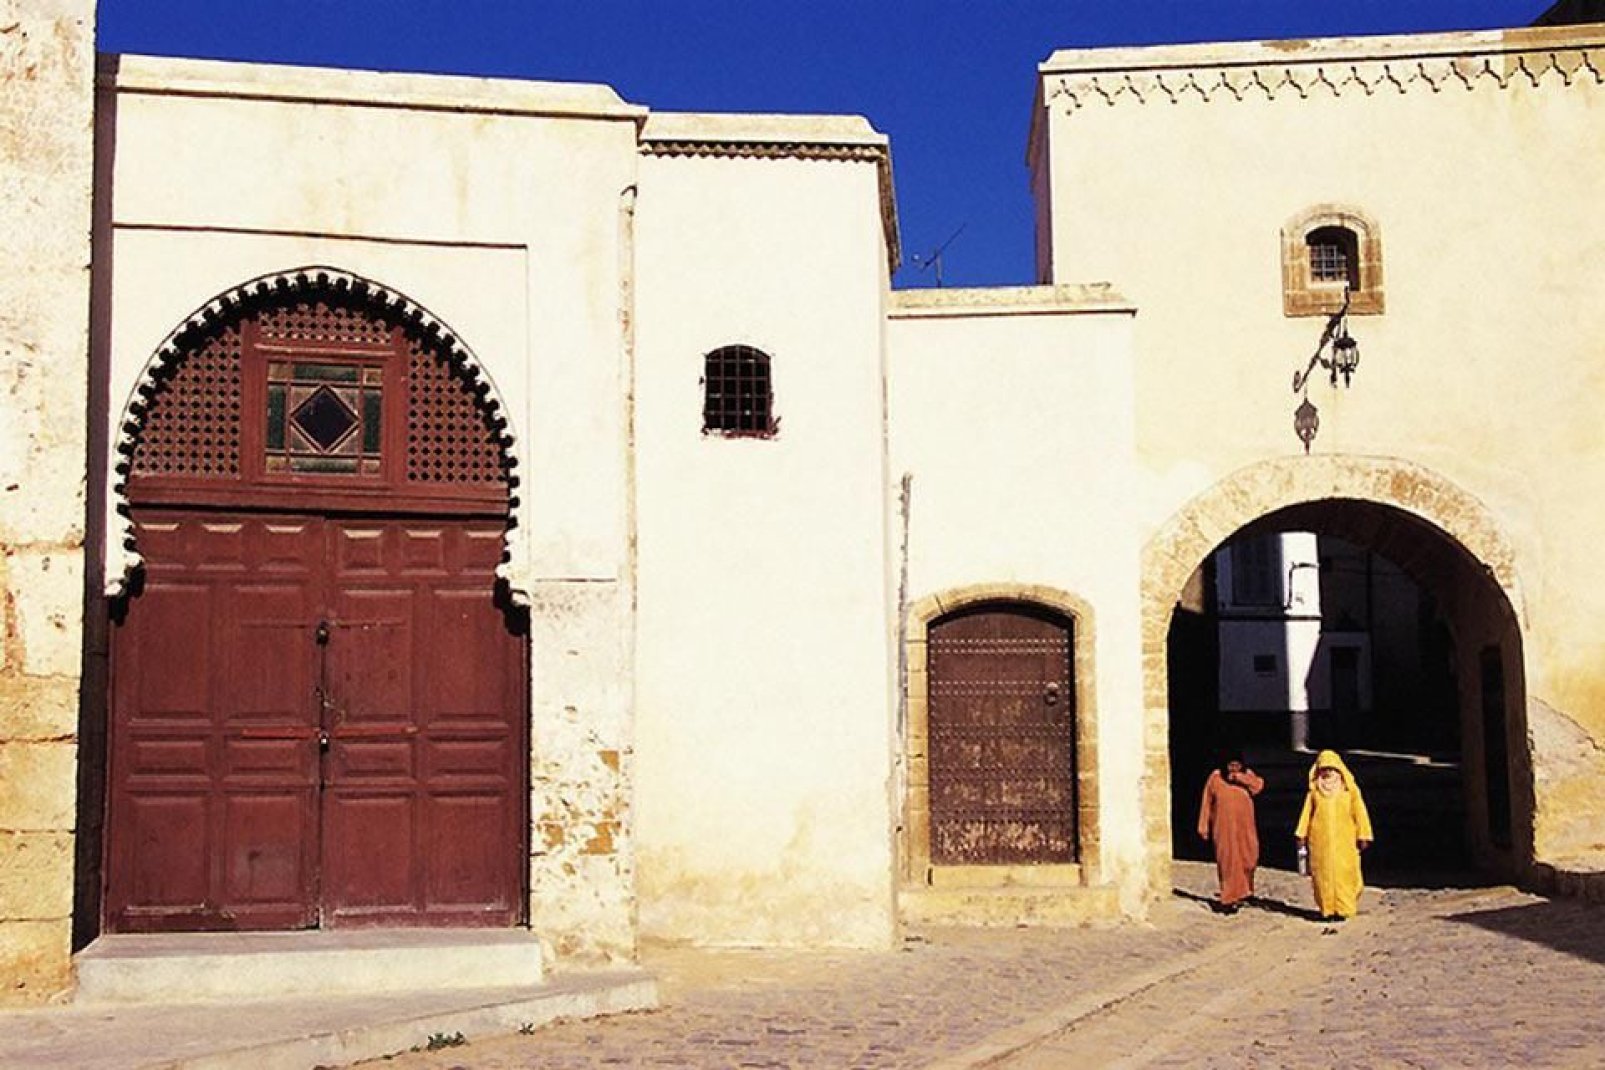 A quiet town on the edge of the ocean, El Jadida's colonial past is still very present.